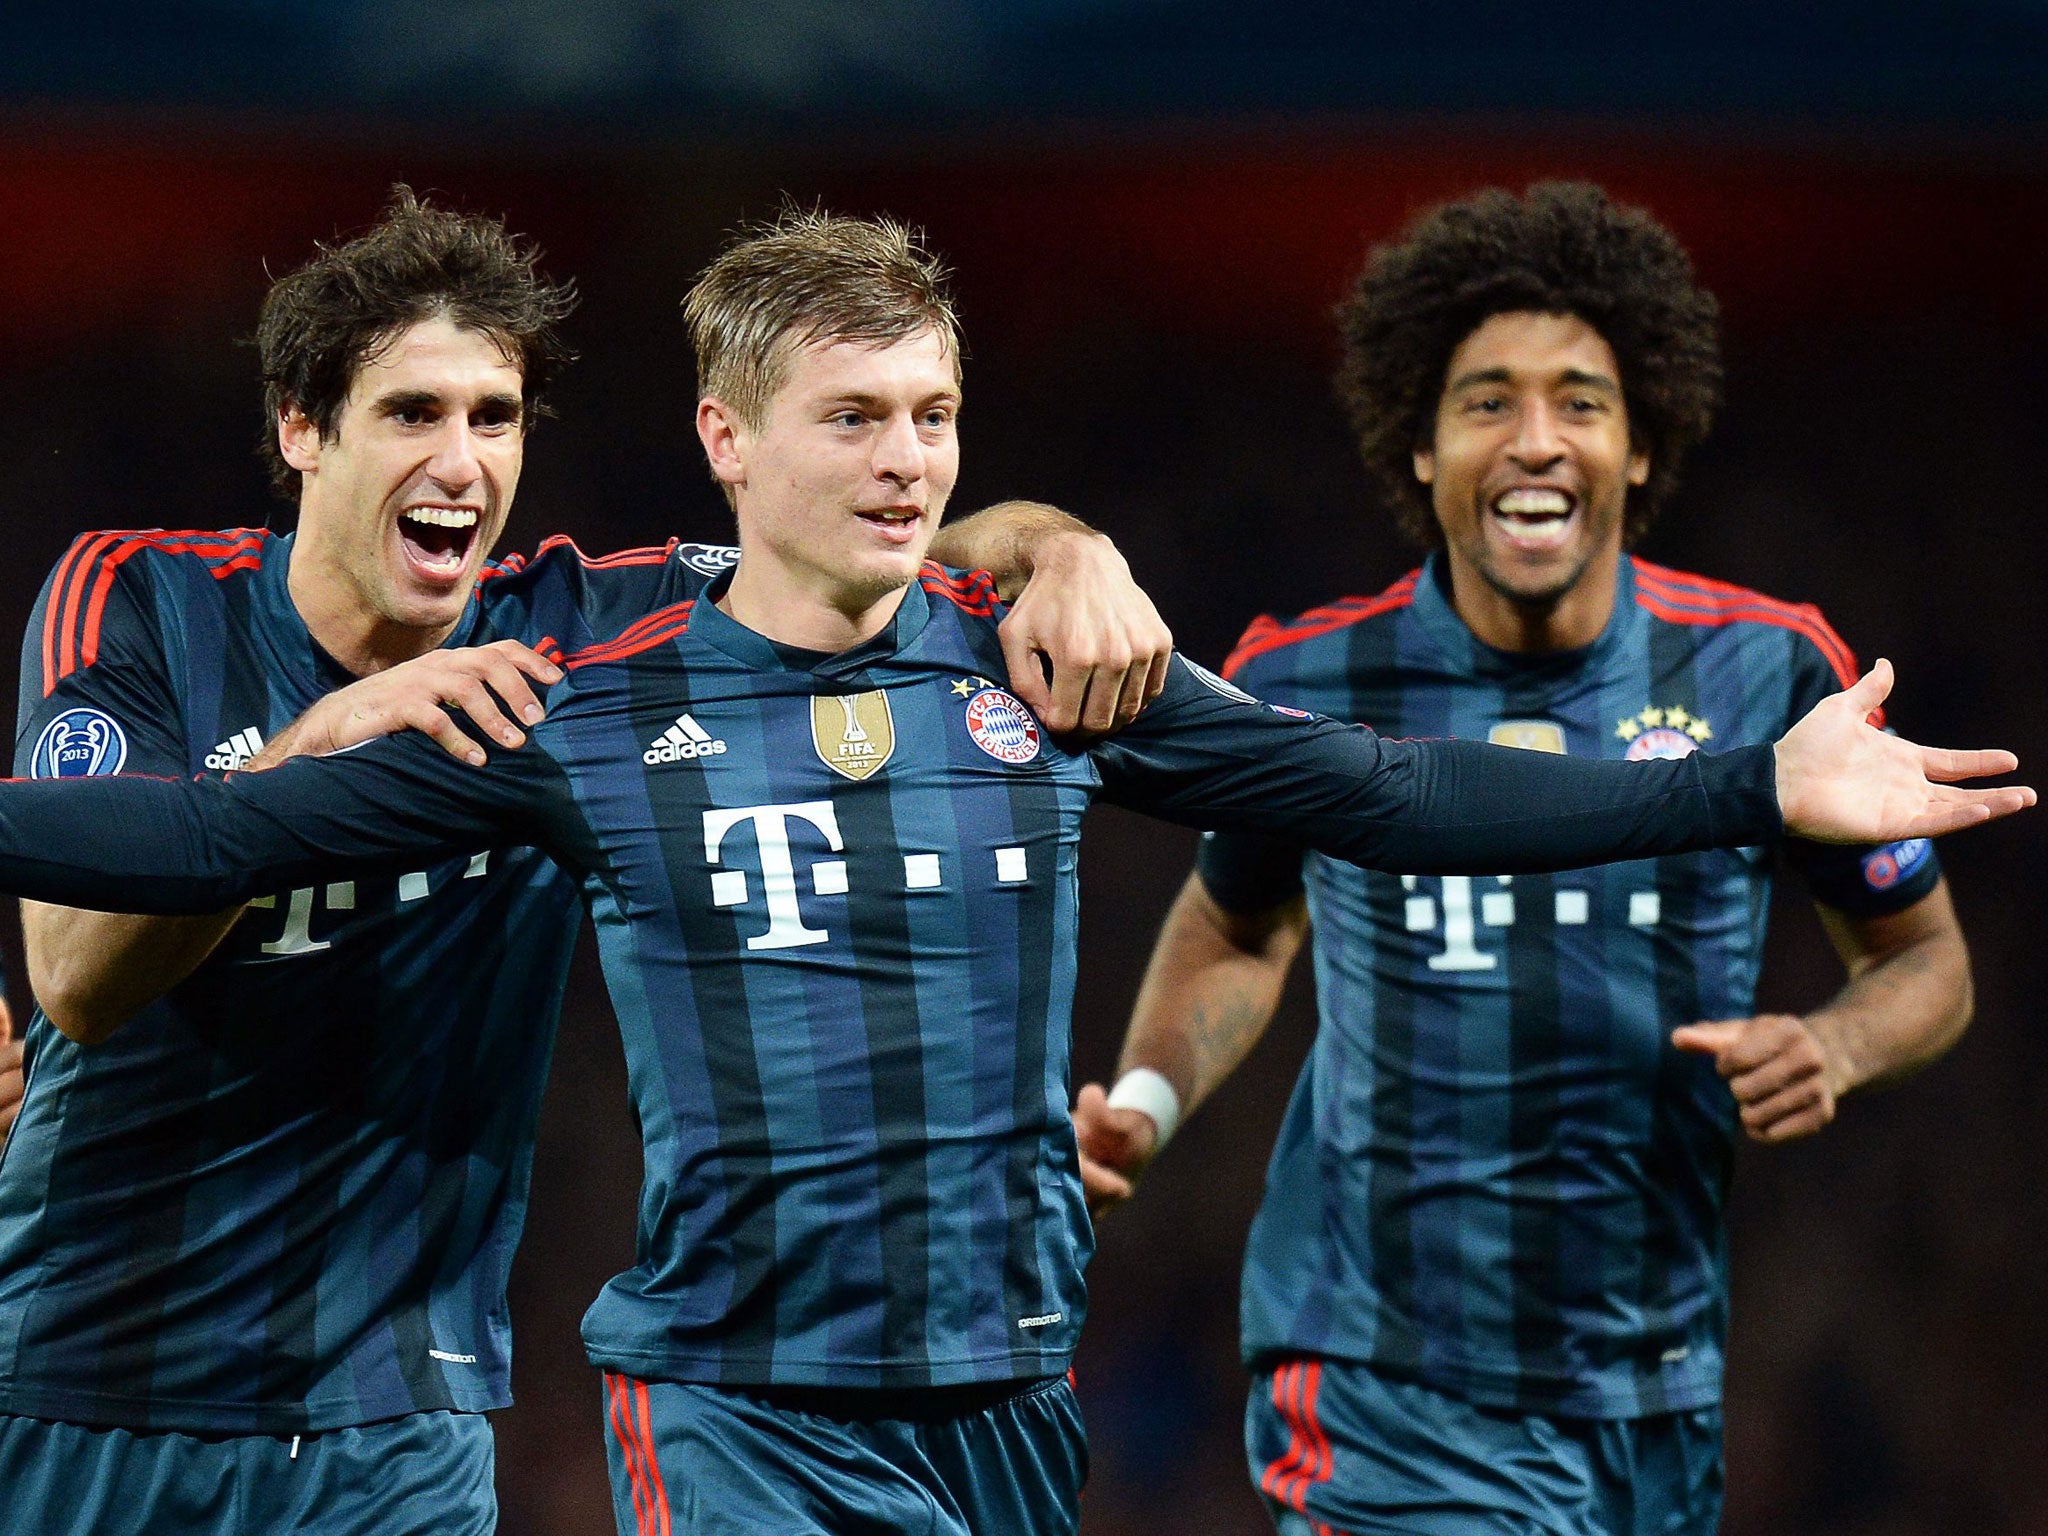 Bayern Munich's Toni Kroos, centre, celebrates with his teammates Javi Martinez, left and Dante, right, after scoring the 1-0 lead during the UEFA Champions League round of 16 first leg soccer match between Arsenal FC and Bayern Munich